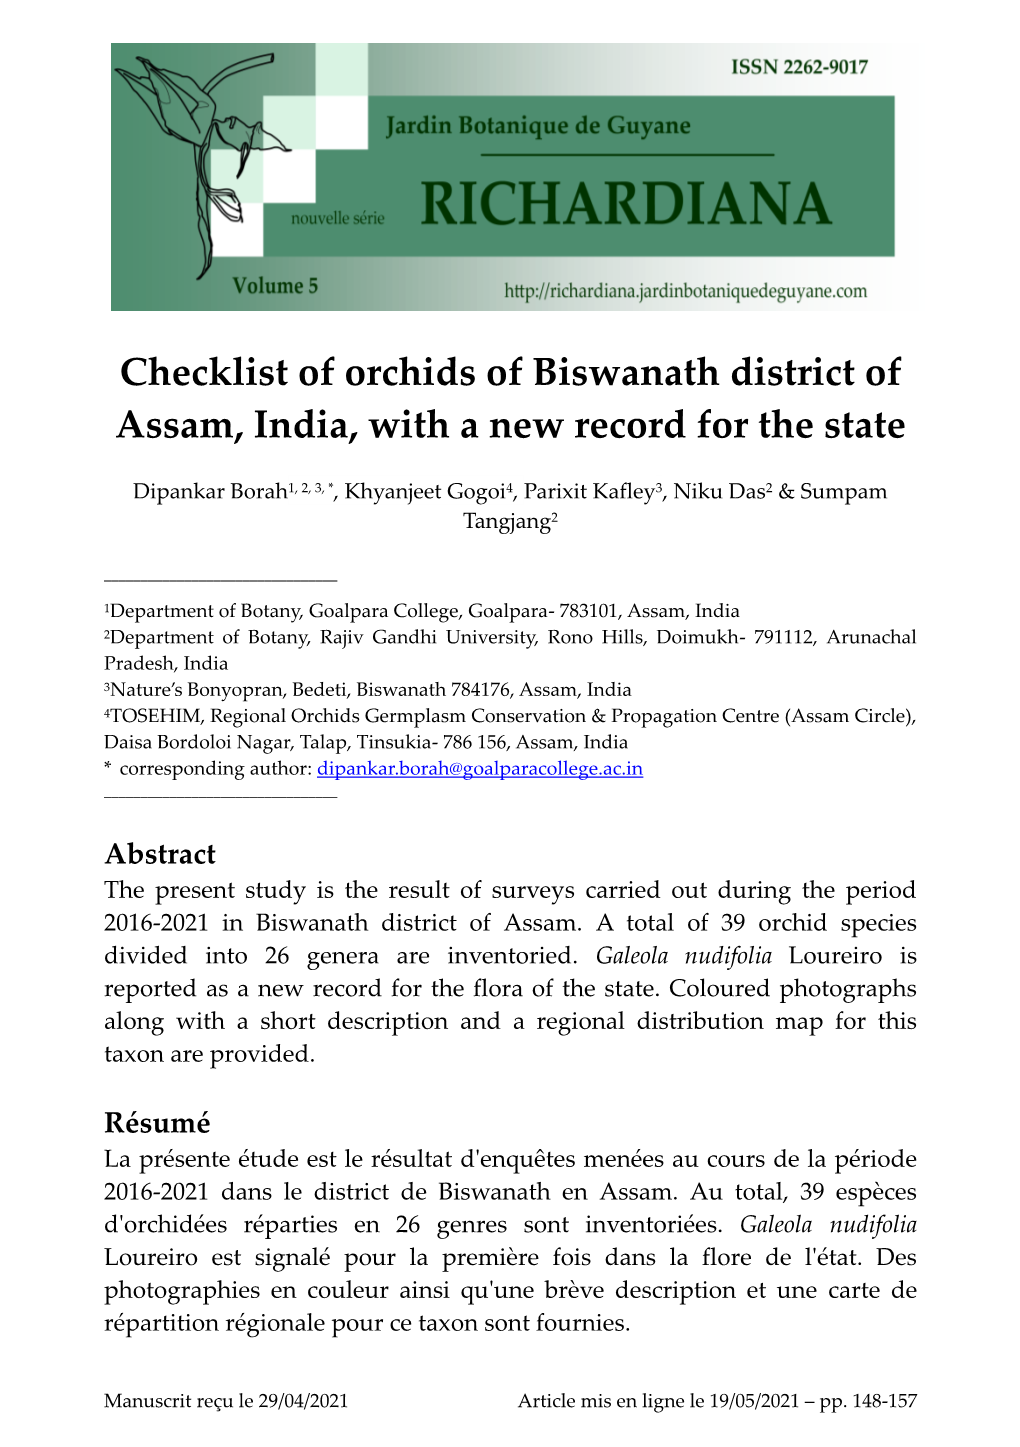 Checklist of Orchids of Biswanath District of Assam, India, with a New Record for the State